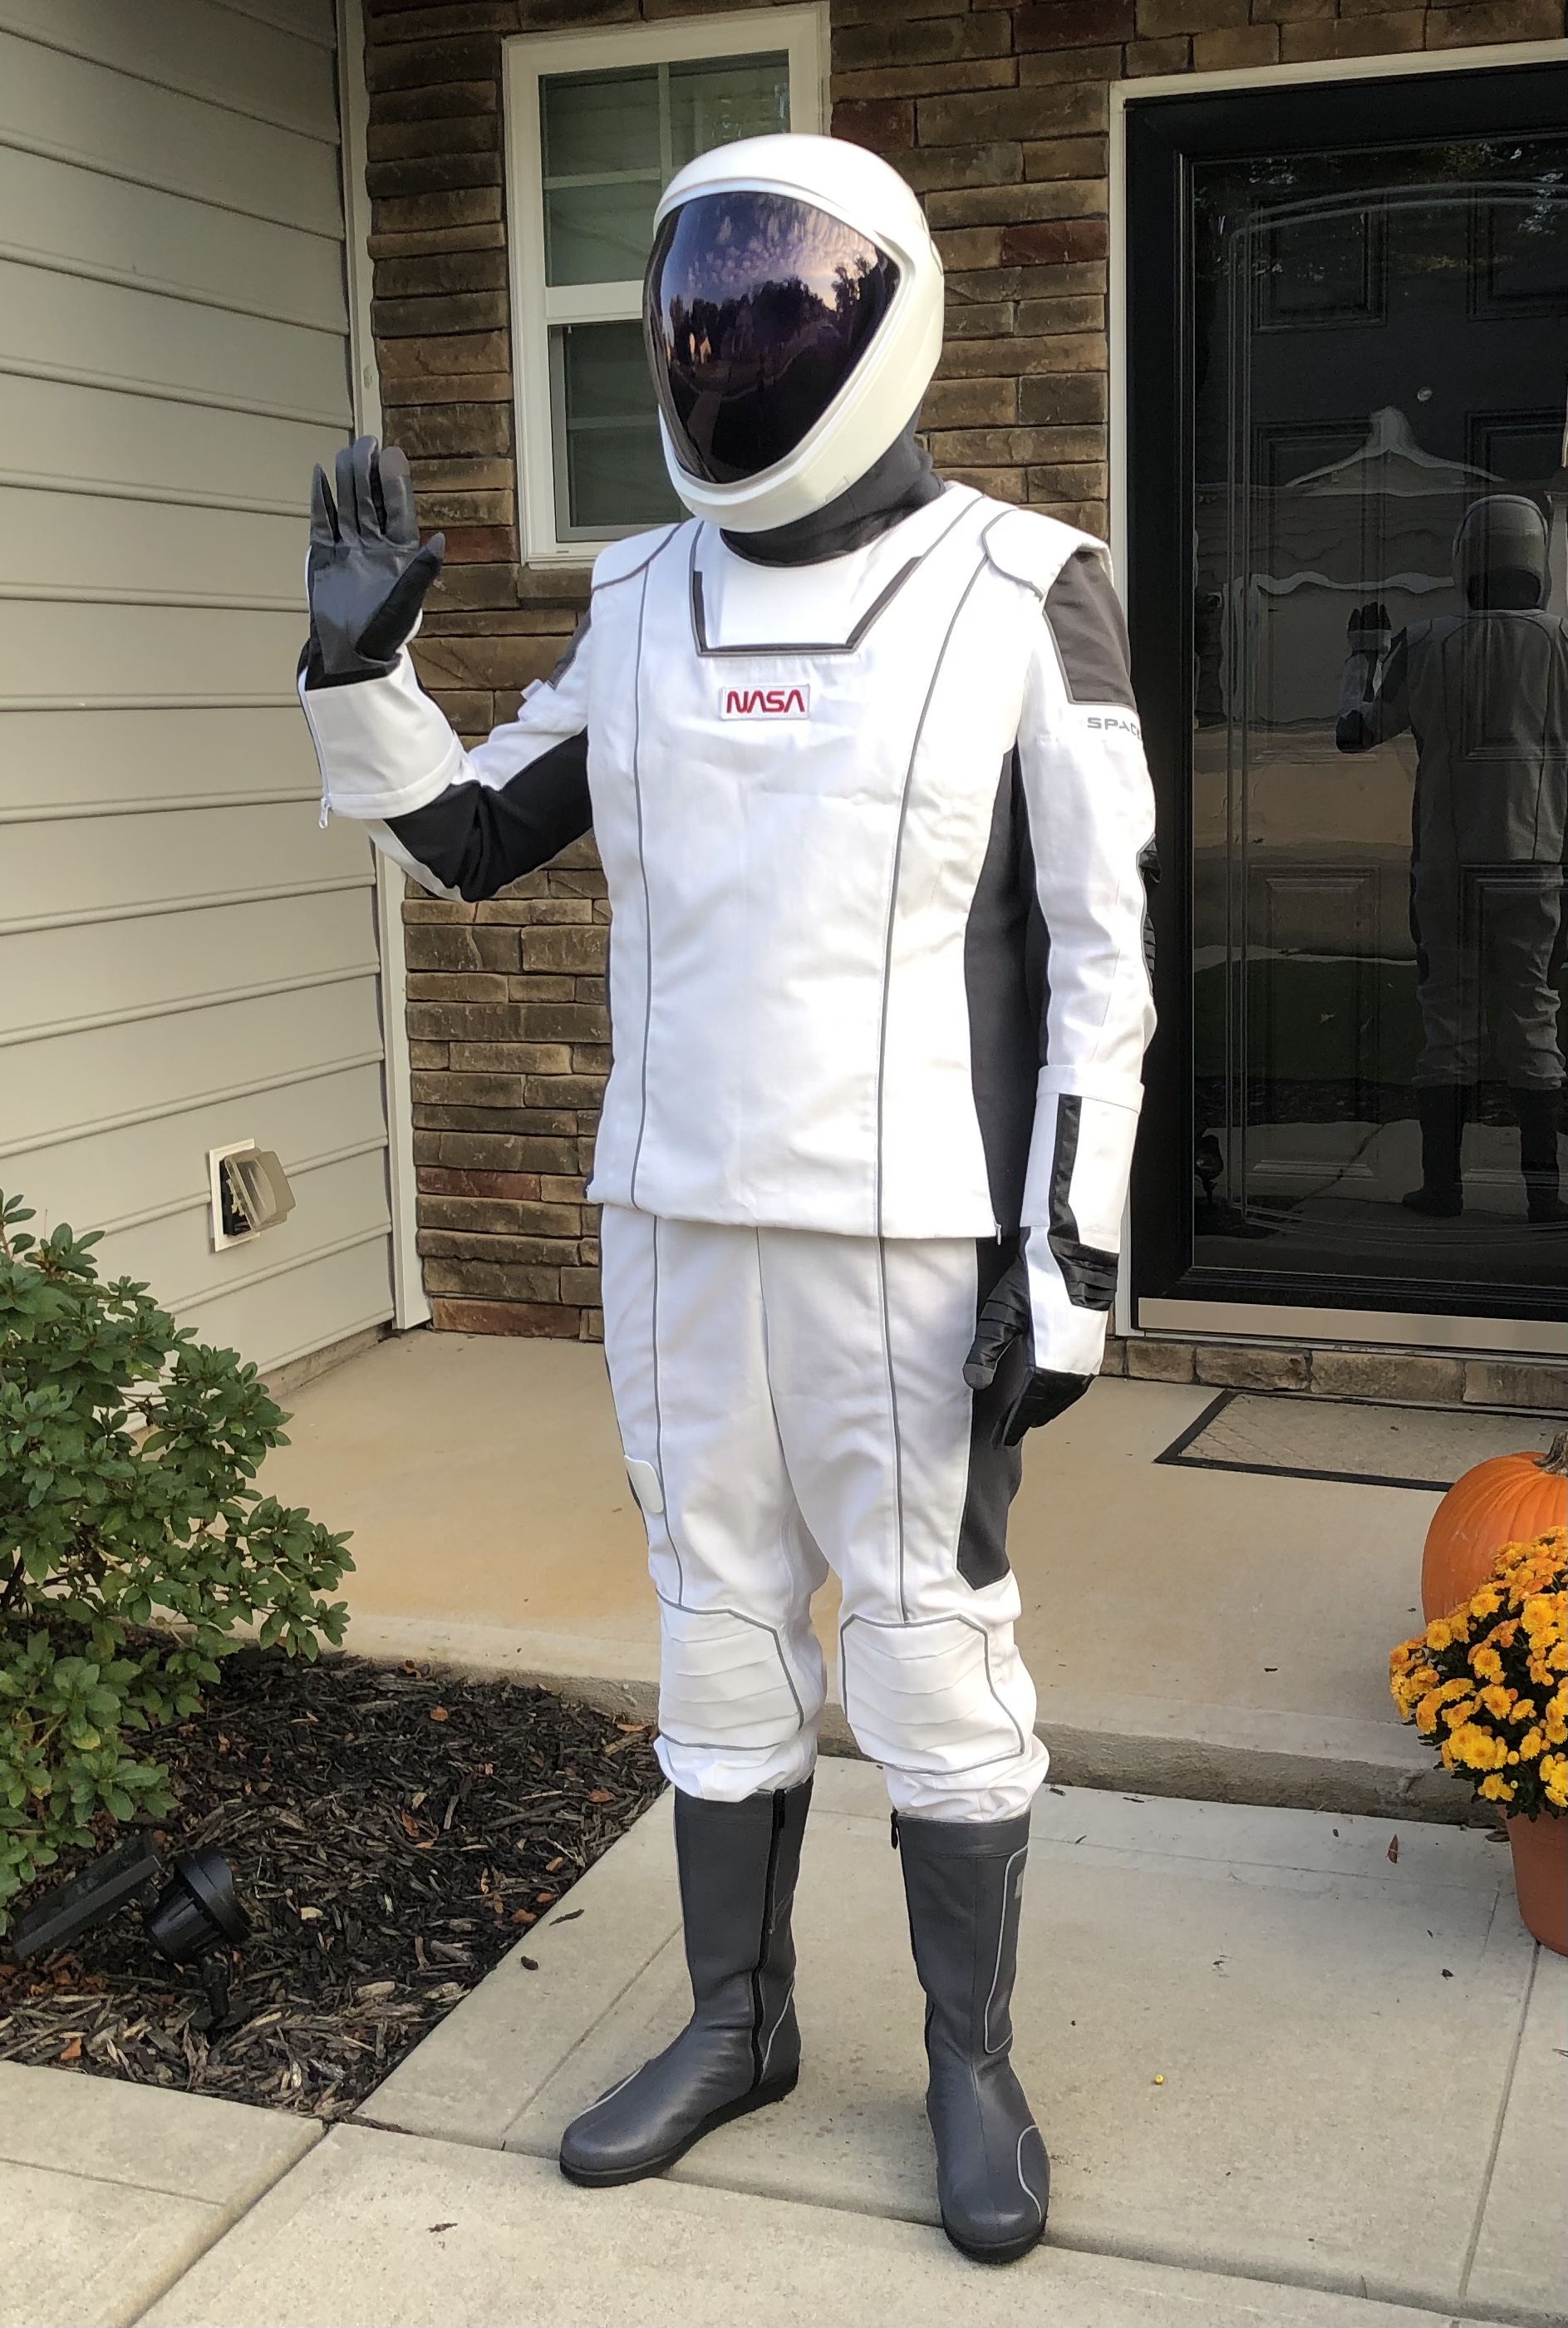 SpaceX IVA Suit Build | RPF Costume and Prop Maker Community